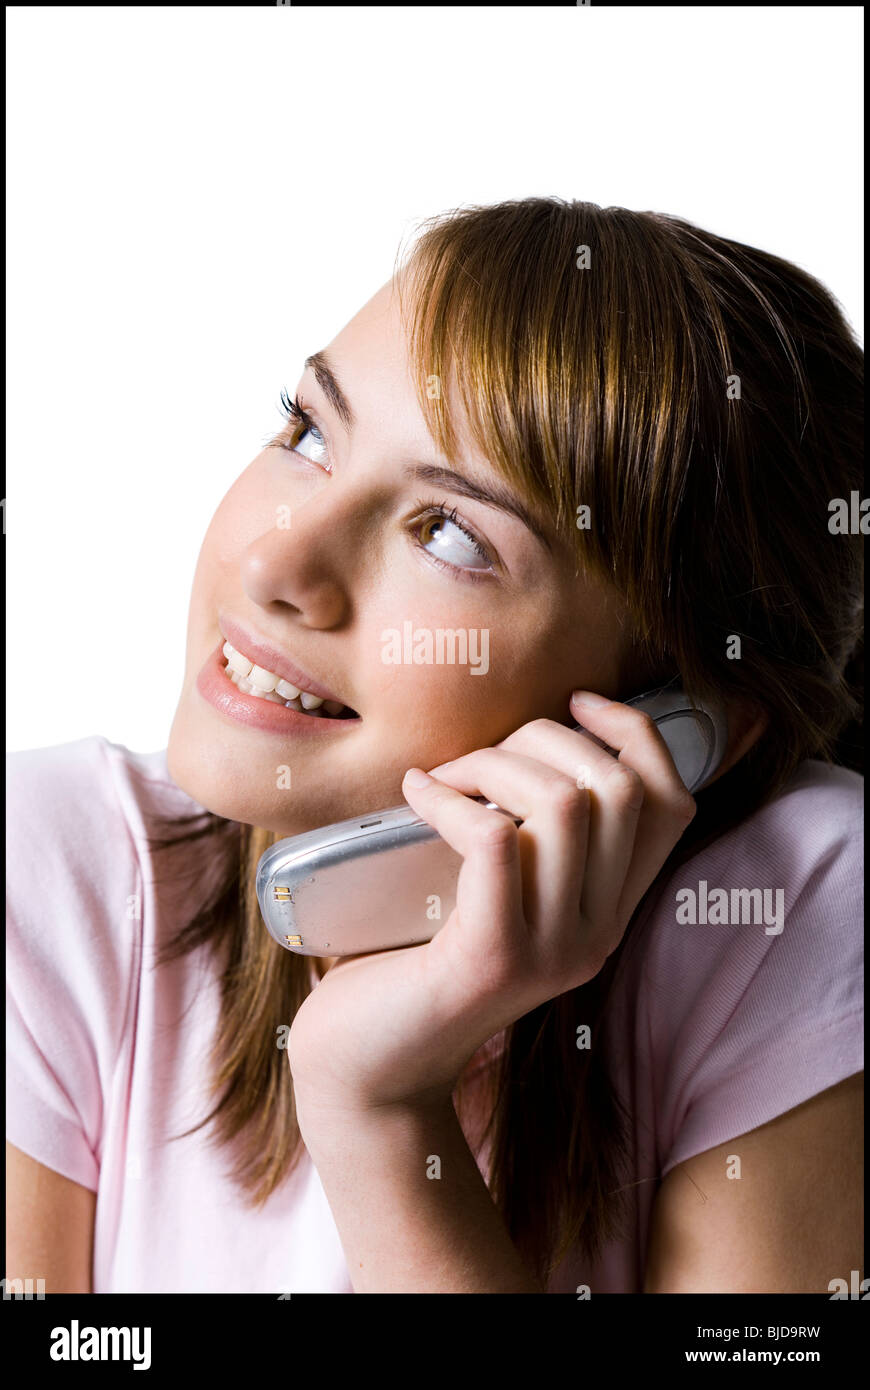 Girl on the phone Stock Photo